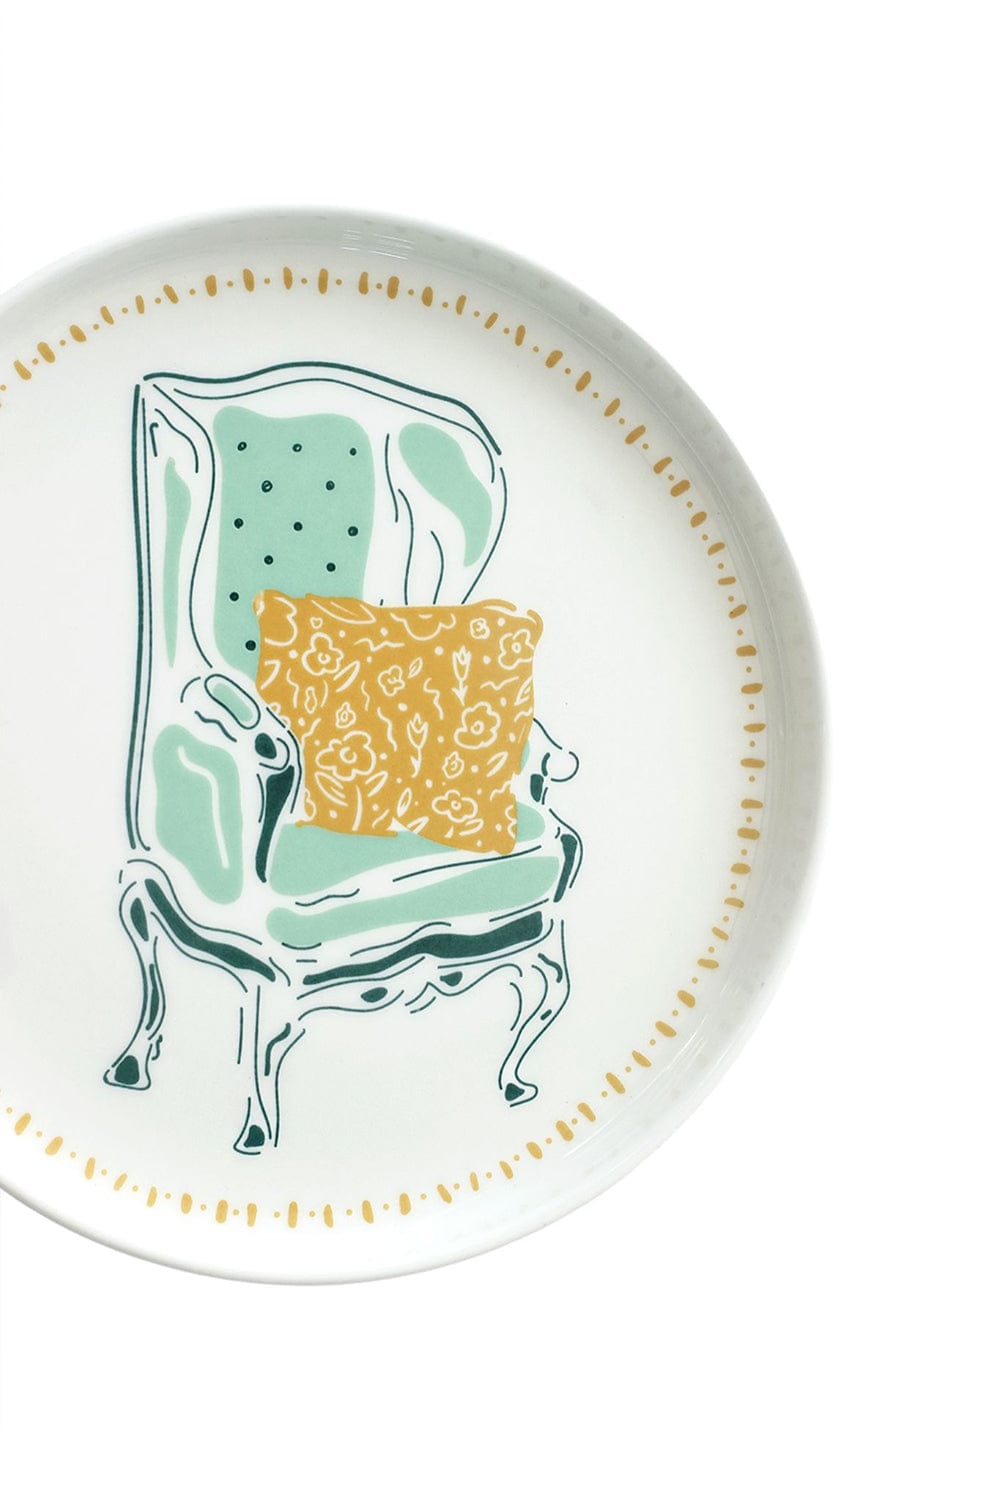 Illustration Series Wall Plate - Chair